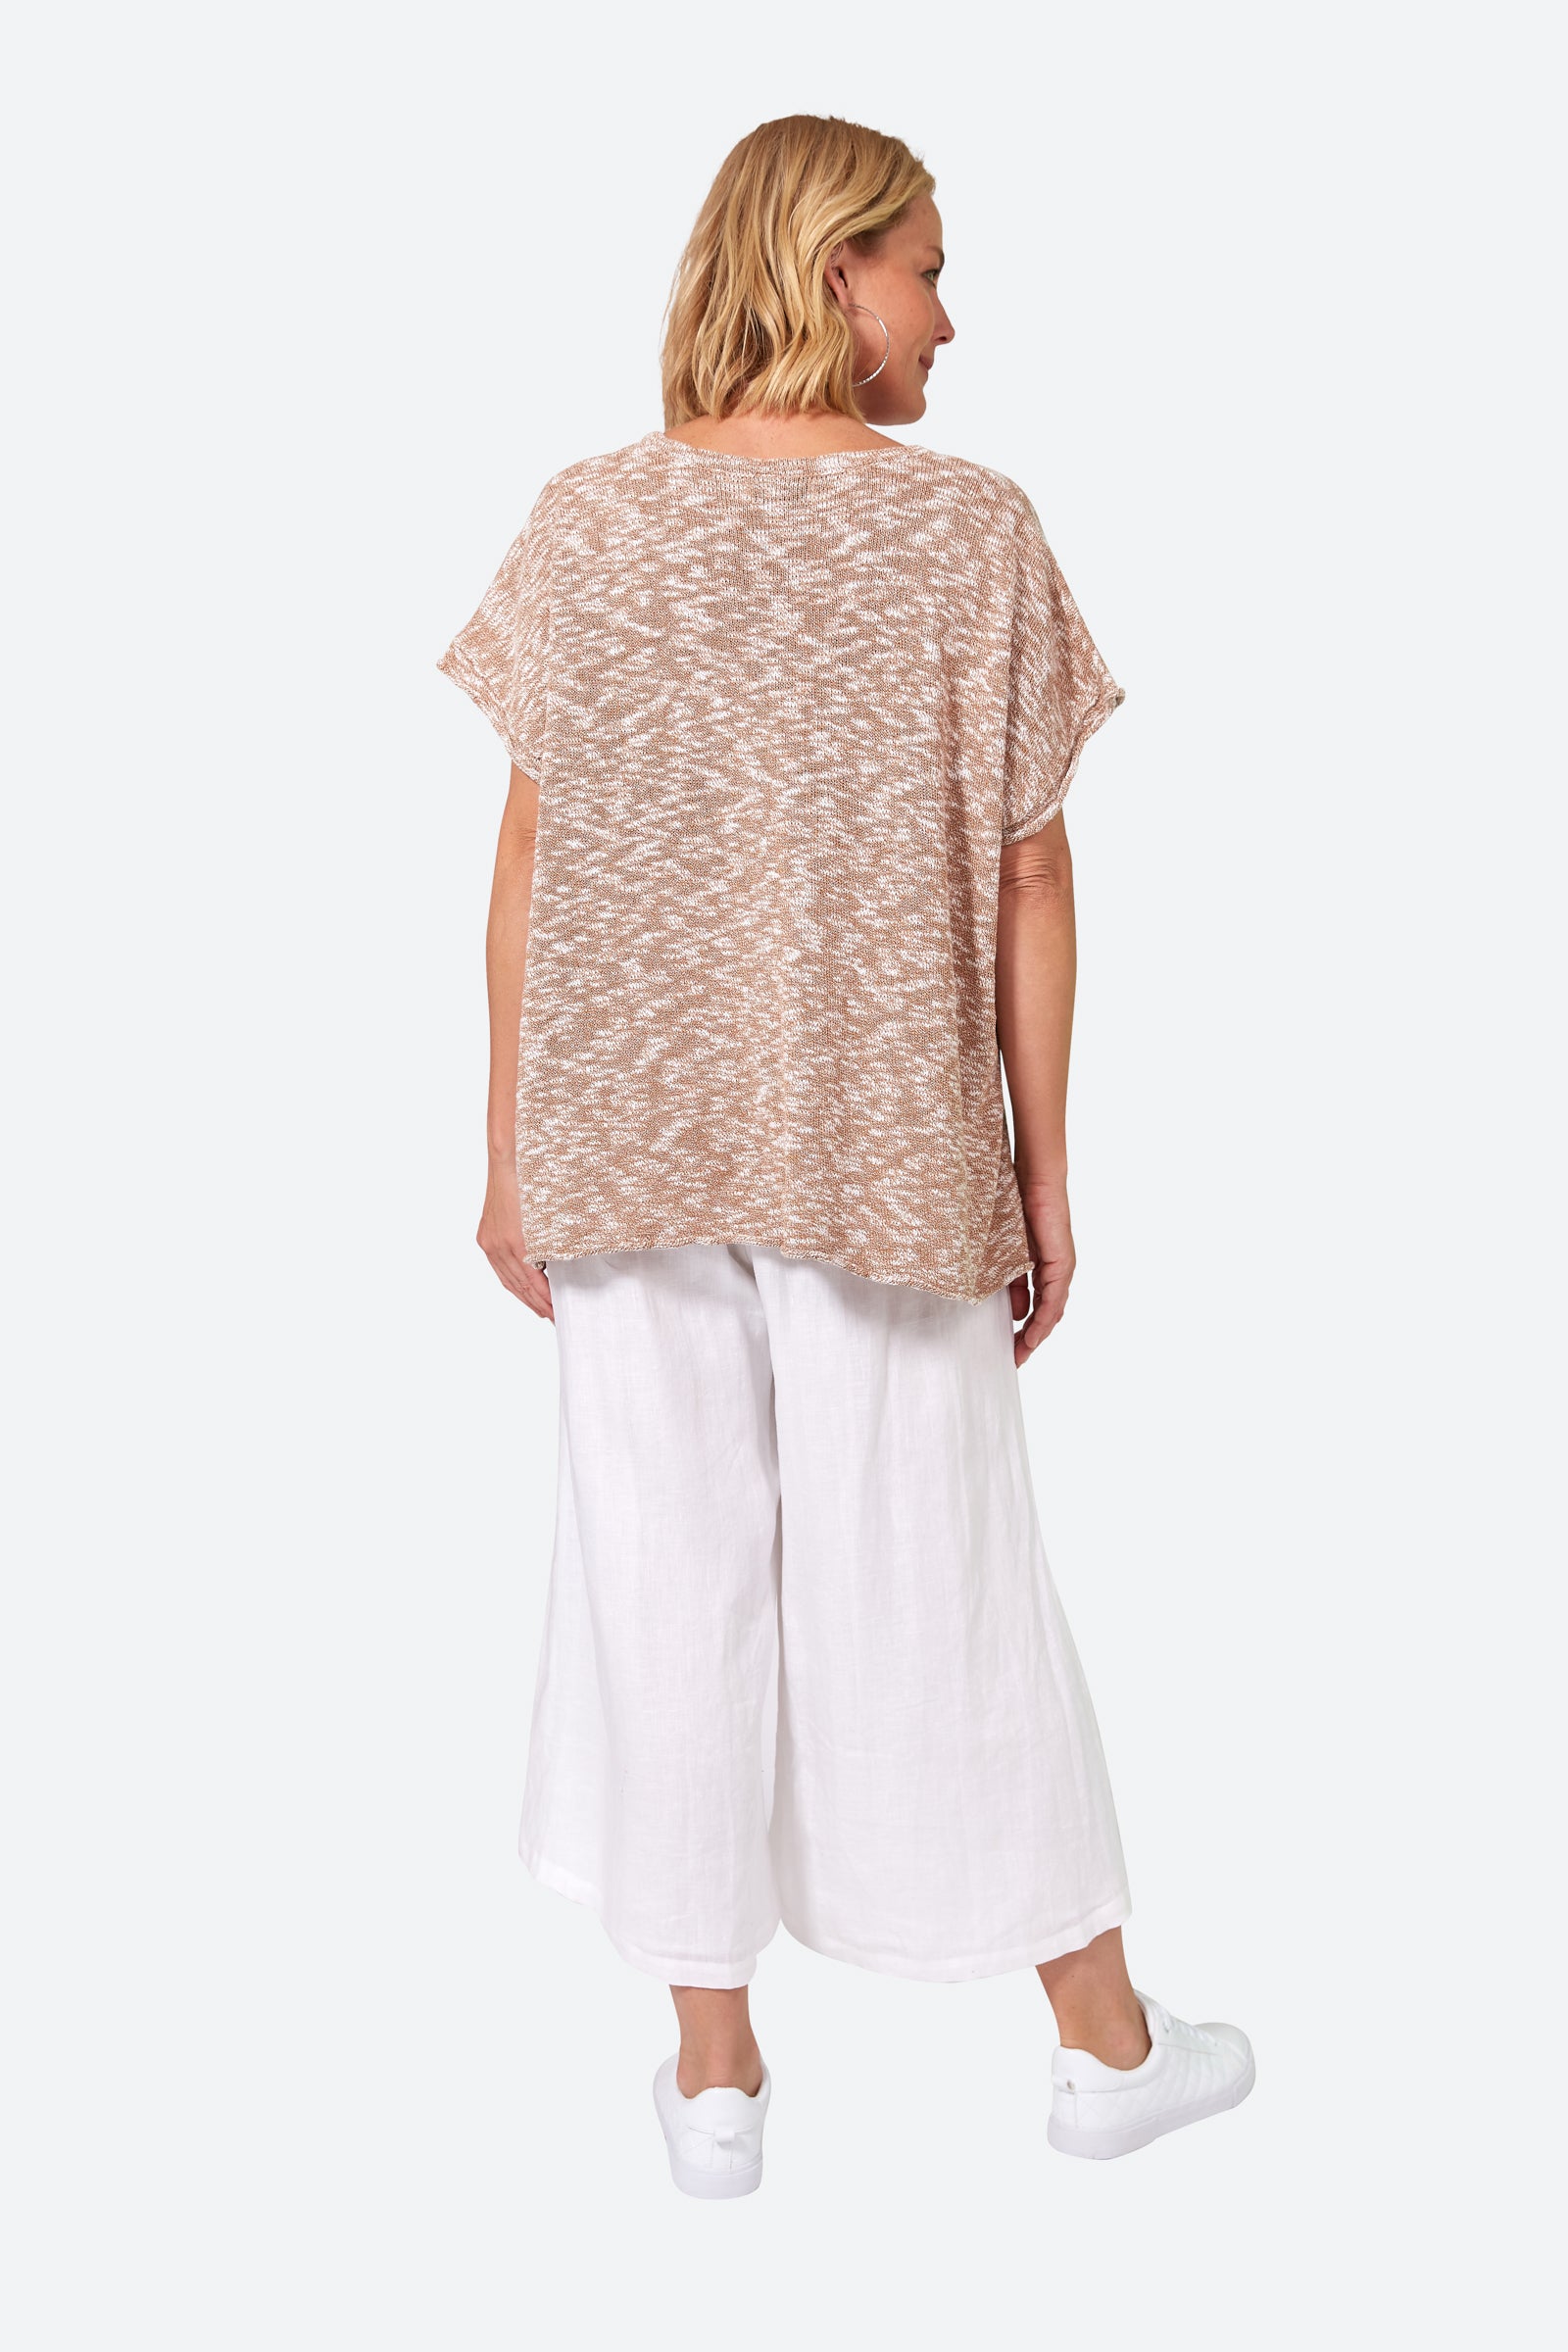 Jovial Top - Toffee - eb&ive Clothing - Knit Top S/S